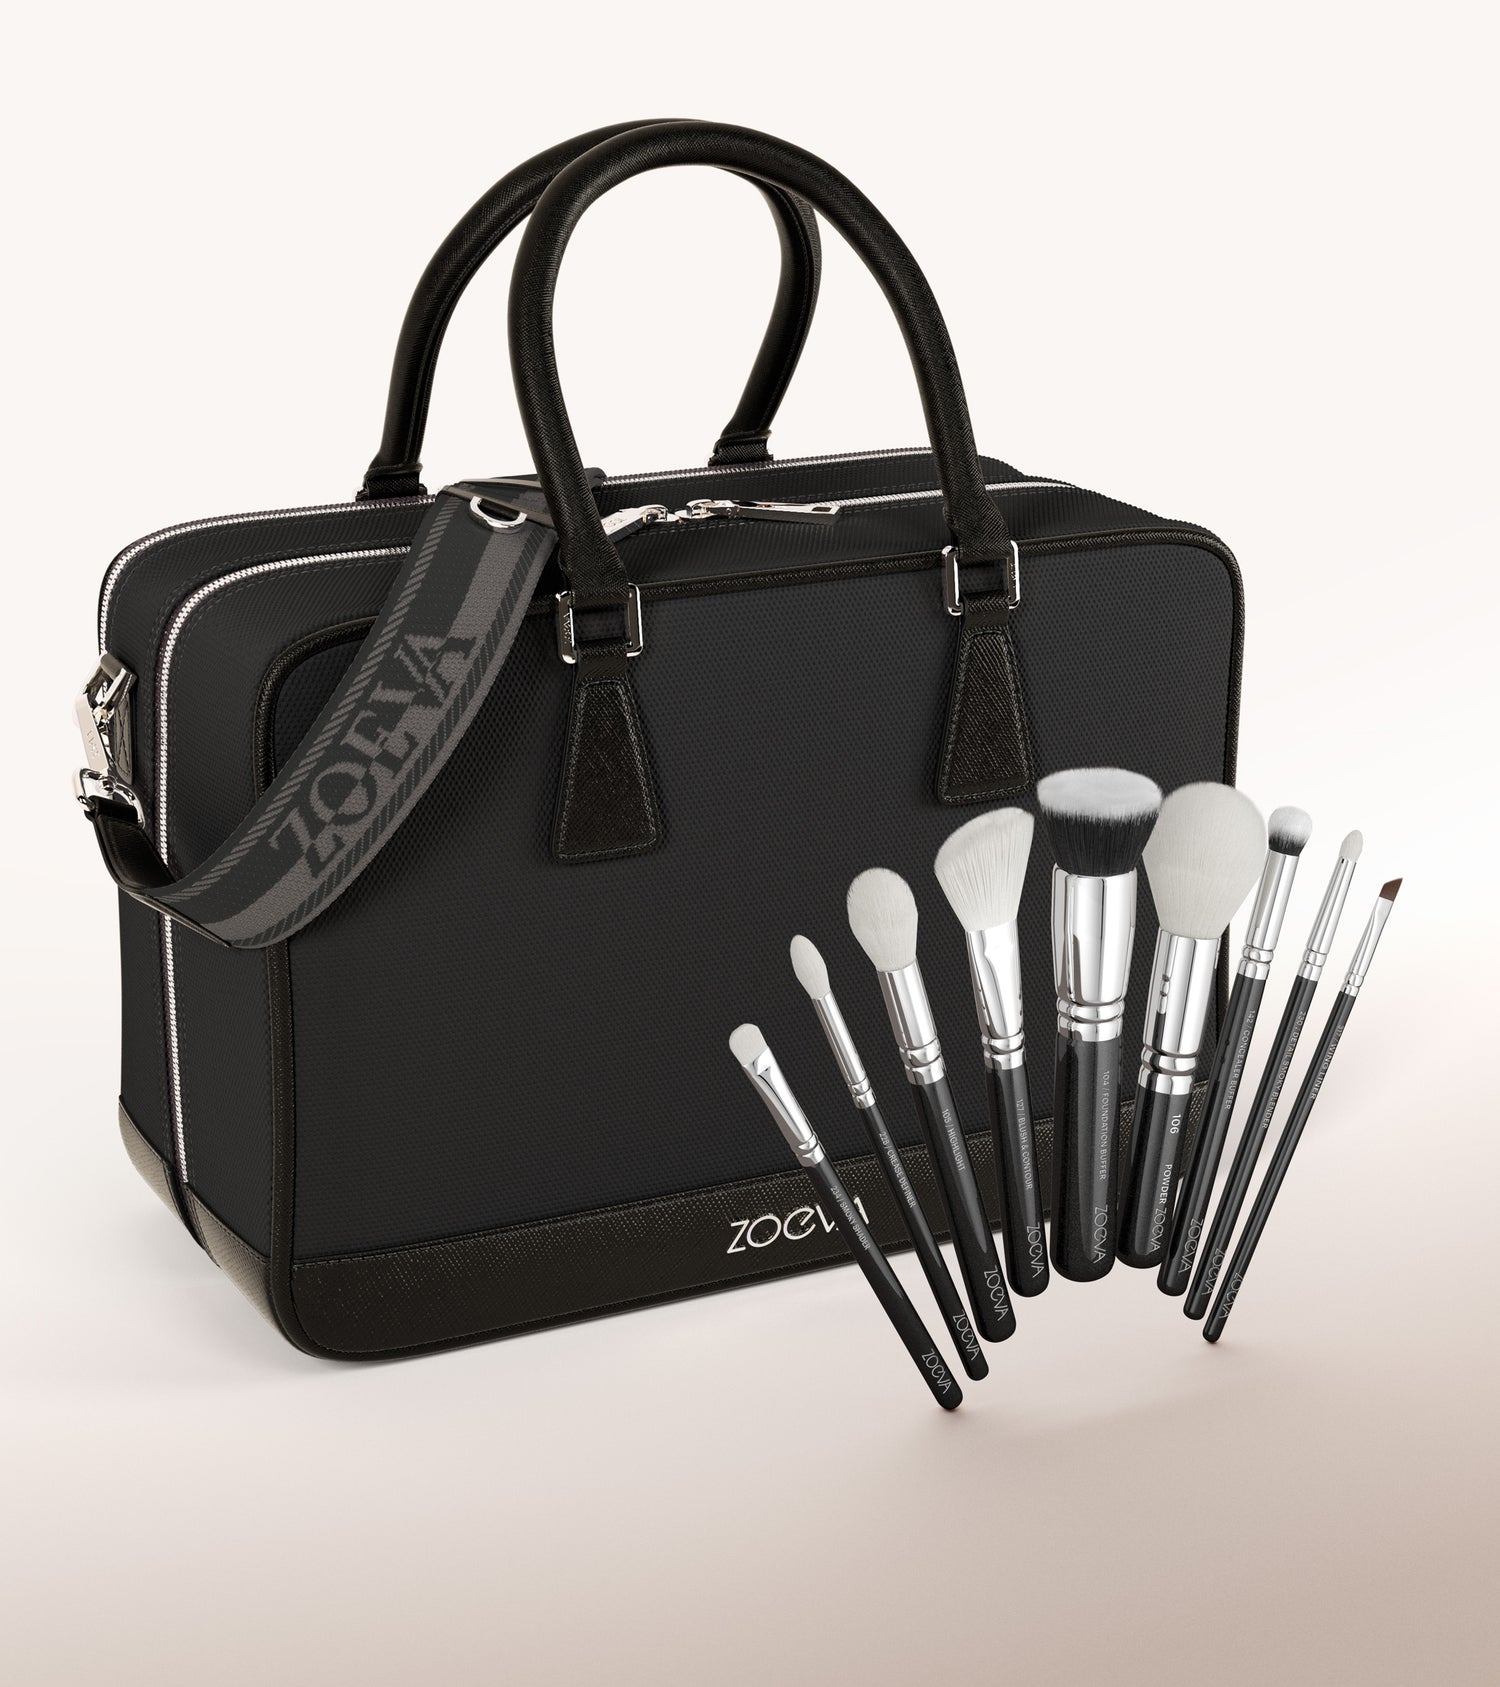 ZOEVA - The Zoe Bag & The Complete Pinselset (Black) - 